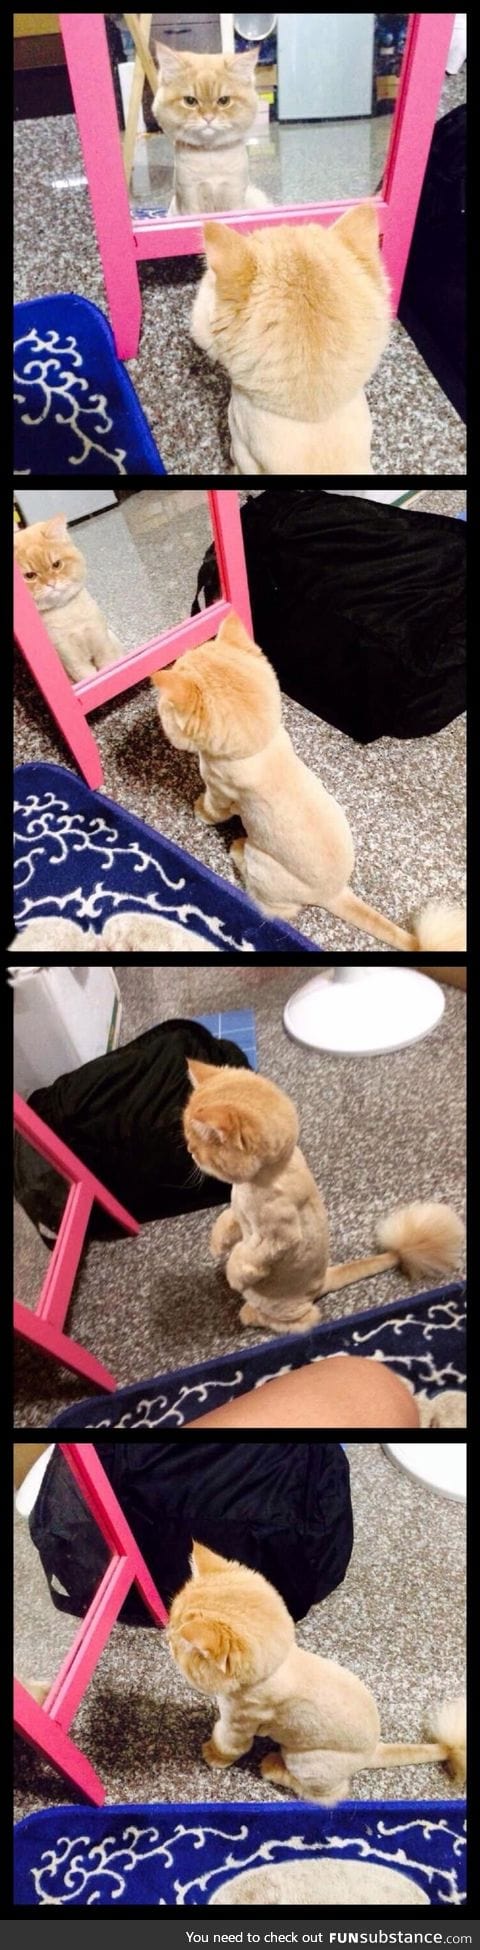 This cat stood for hours in front of the mirror after getting shaved